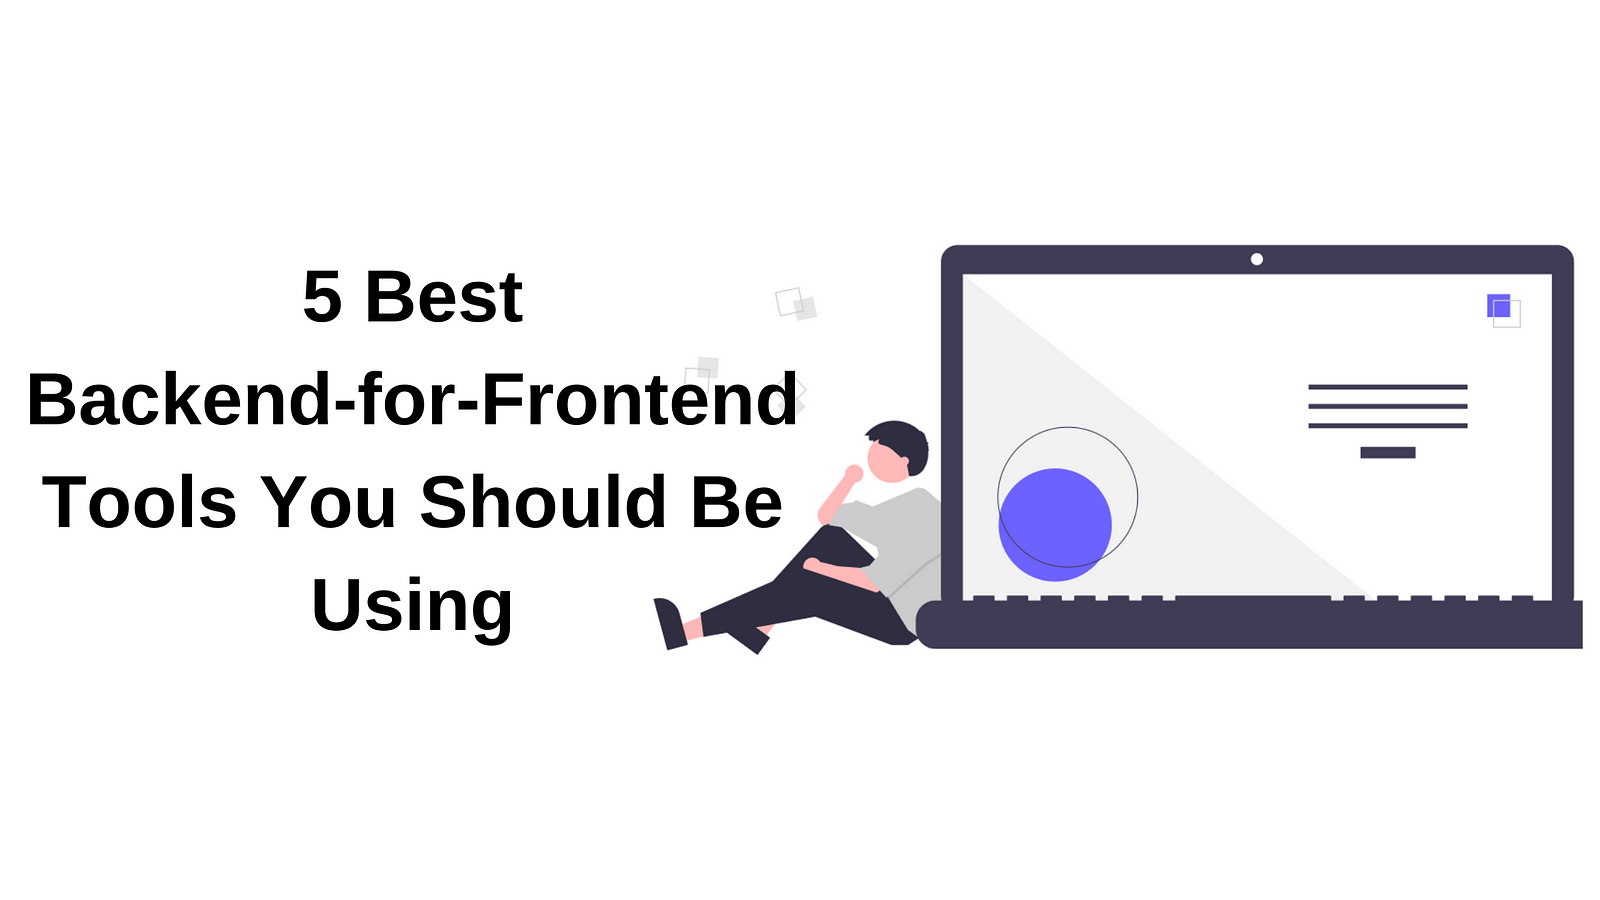 5 Best Backend-for-Frontend Tools You Should Be Using